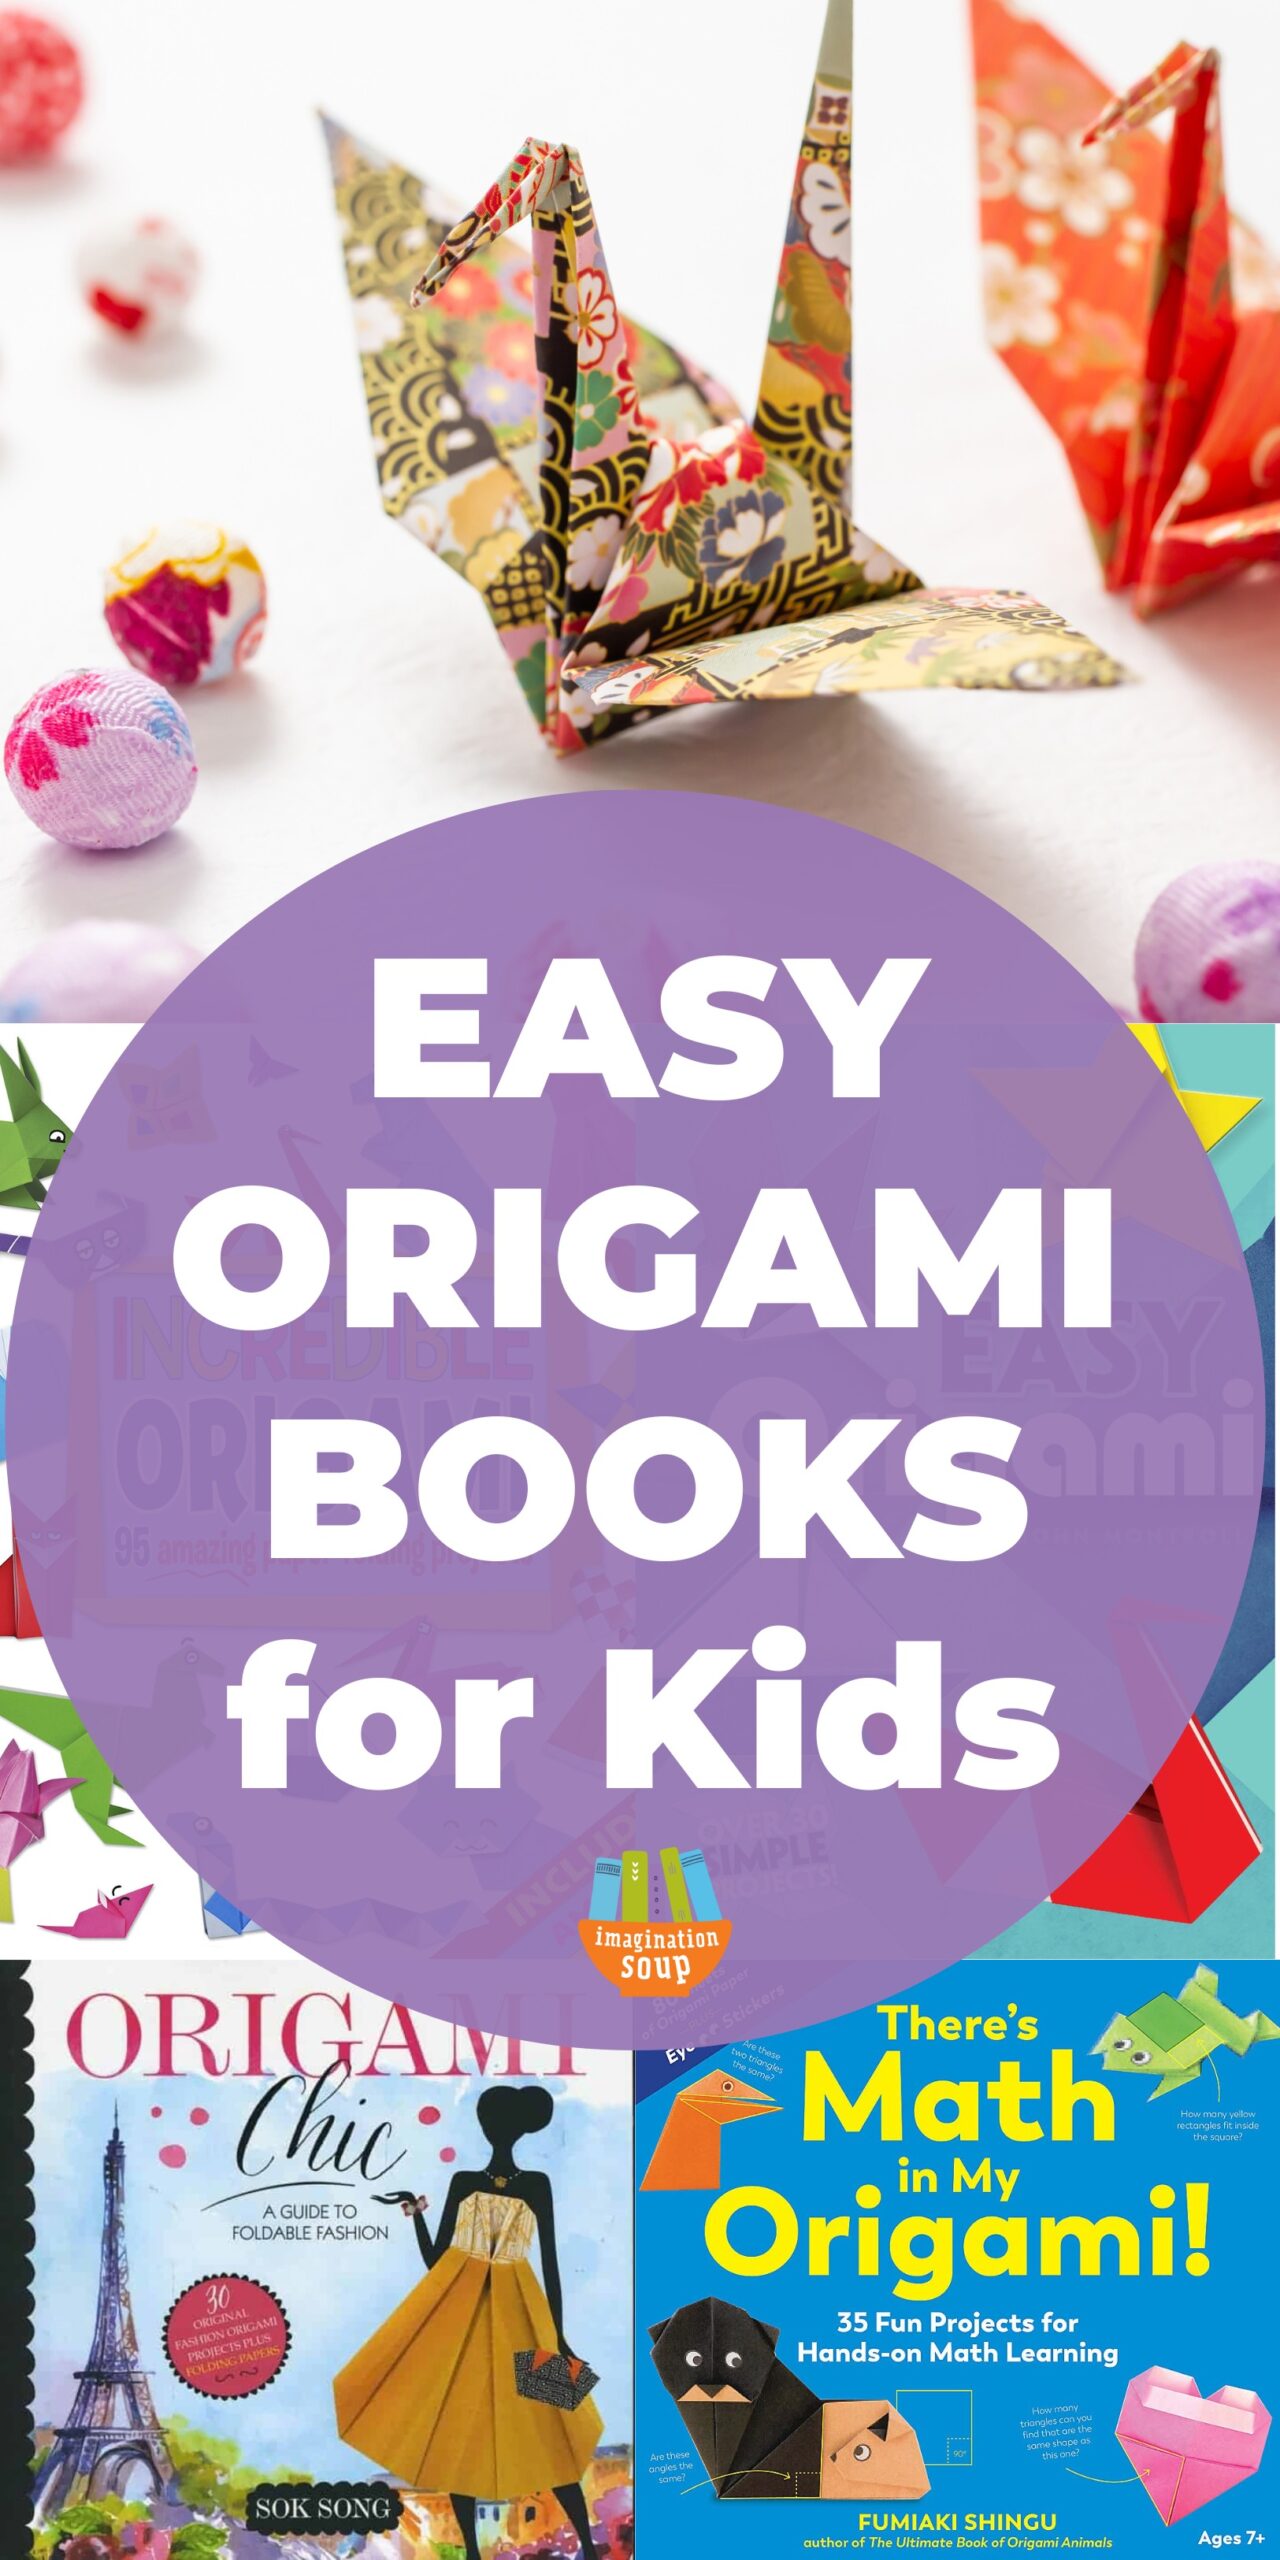 Are your kids interested in learning how to do the paper craft of origami? Find easy origami for kids books with step-by-step directions and illustrations. These origami books for beginners offer fun and beautiful paper folding models as well as simple origami projects. The directions are easy to follow and perfect for children of all ages six and up, beginners and intermediate levels.